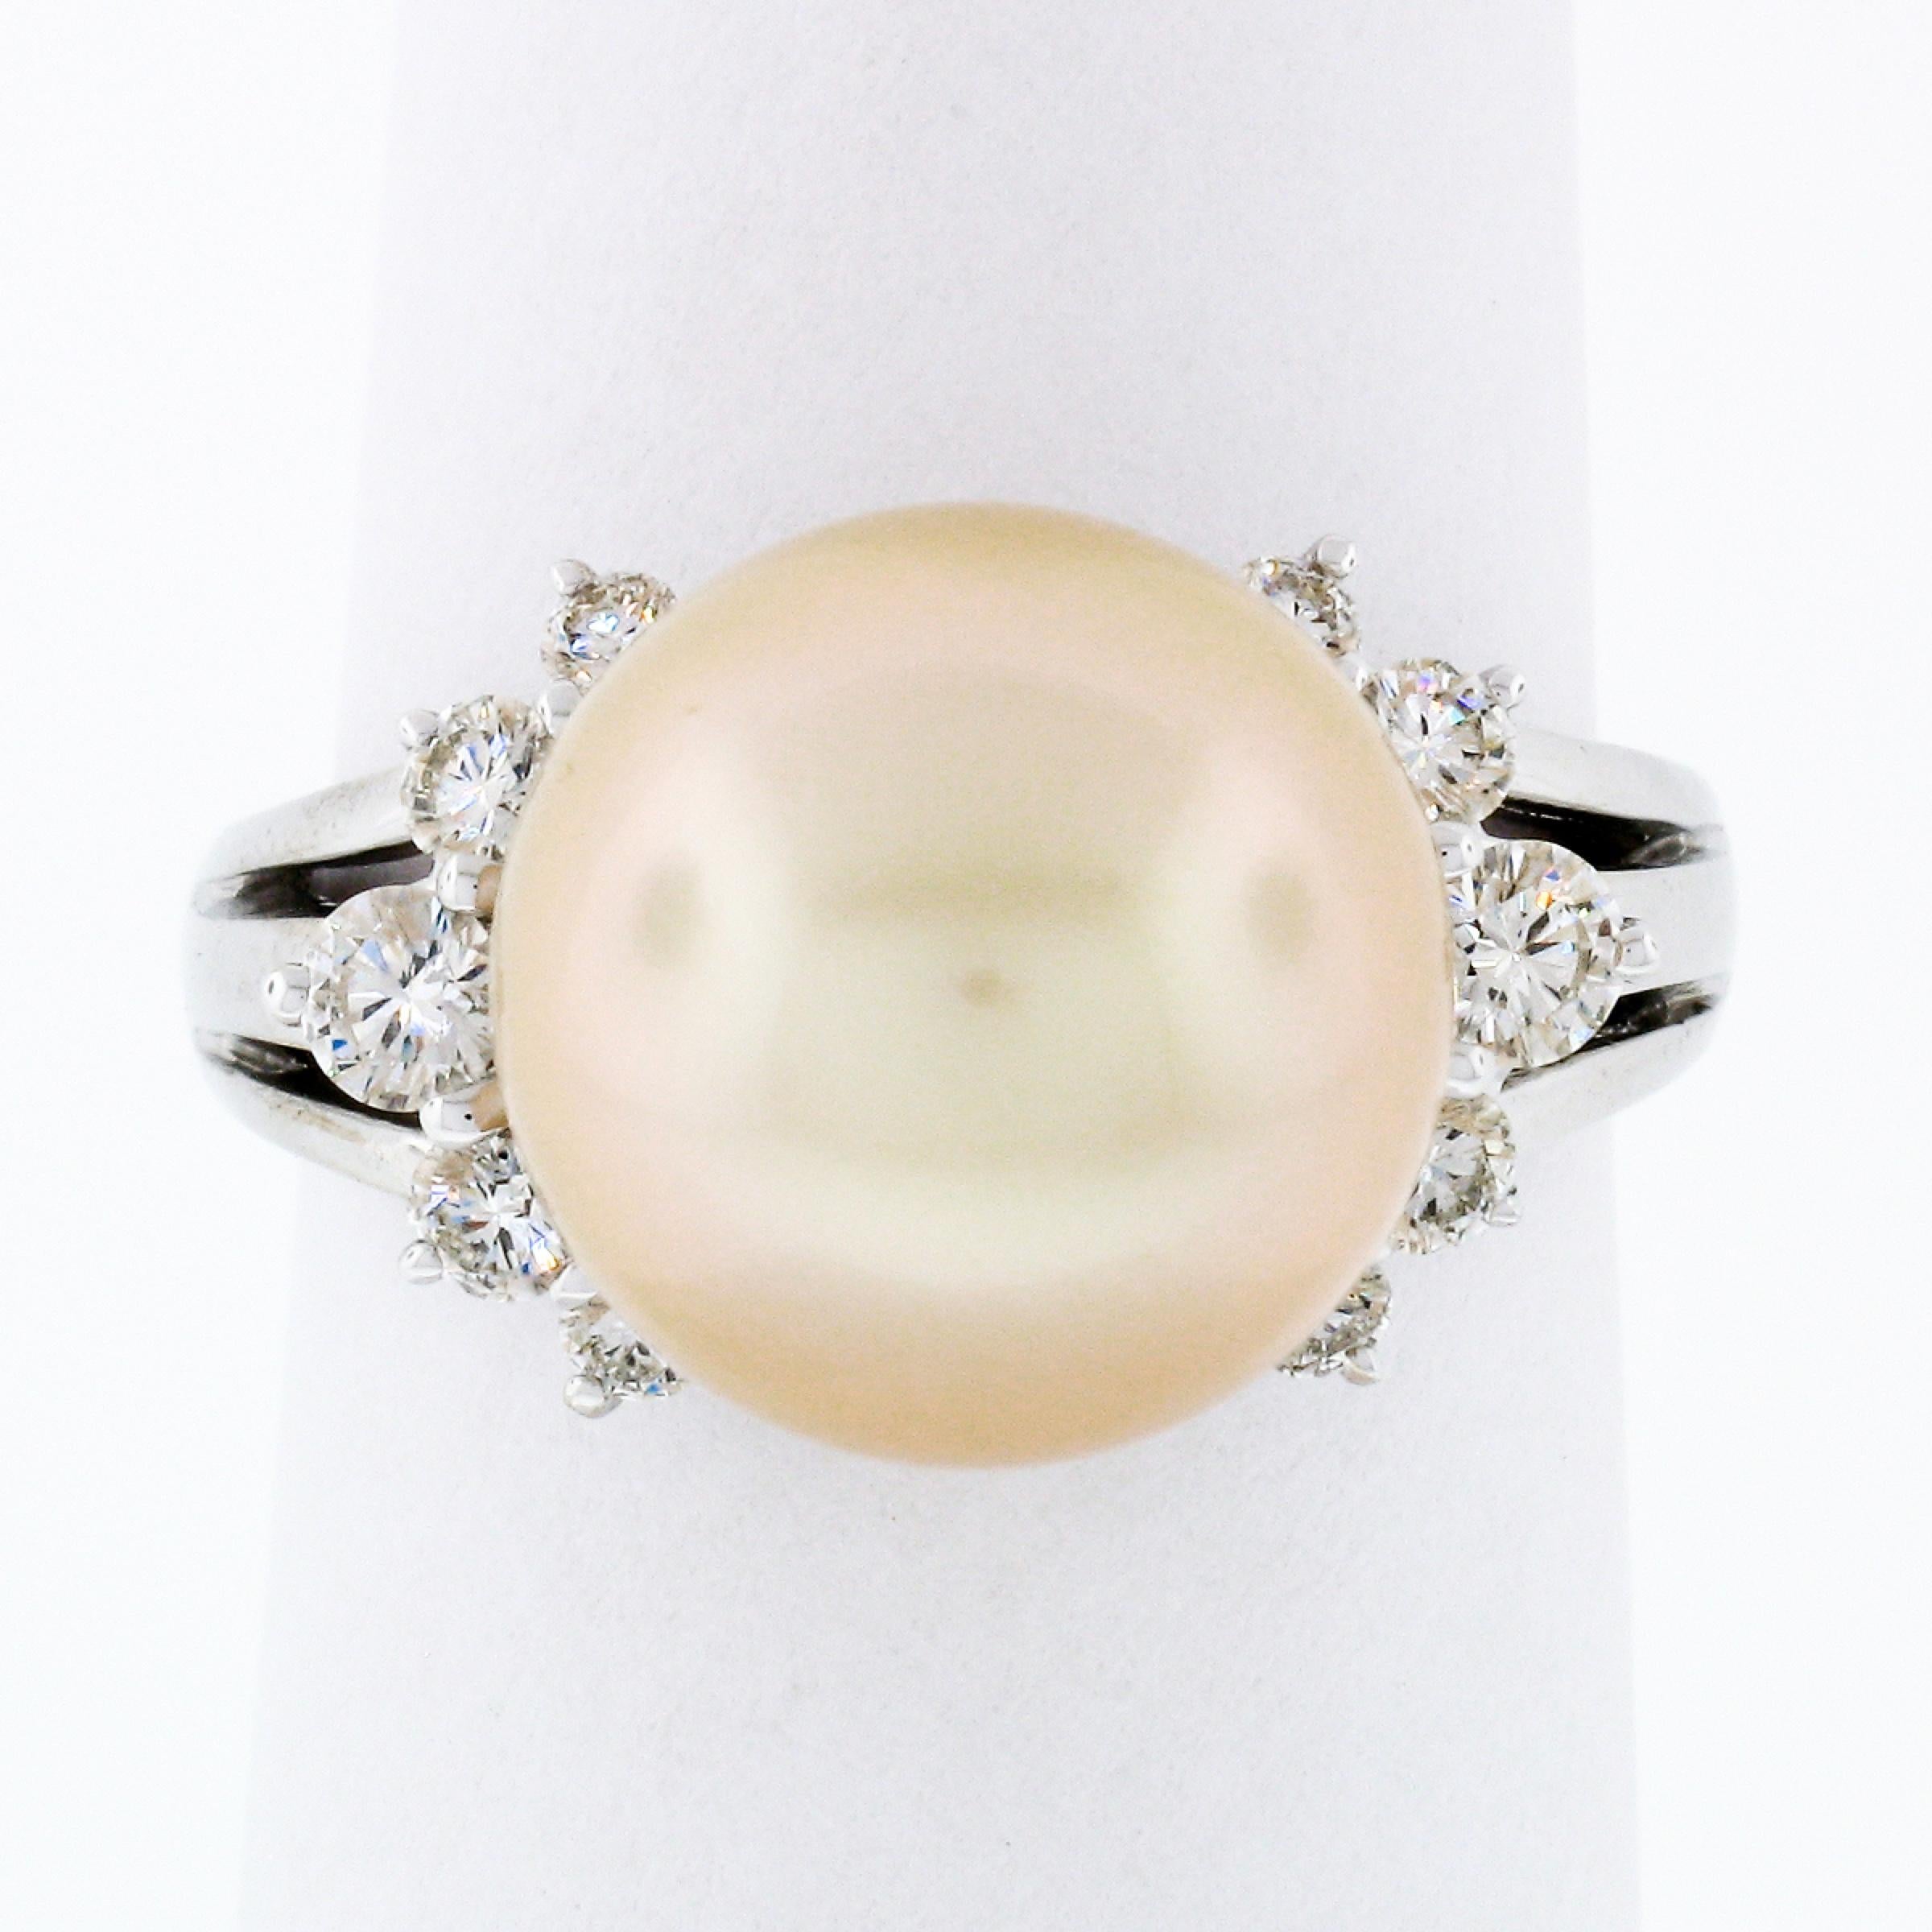 This beautiful pearl solitaire ring is crafted in solid 18k white gold and features 10 stunning diamond accents on both sides. The fine pearl displays absolutely attractive large size and amazing golden-white color with smooth, lustrous surface